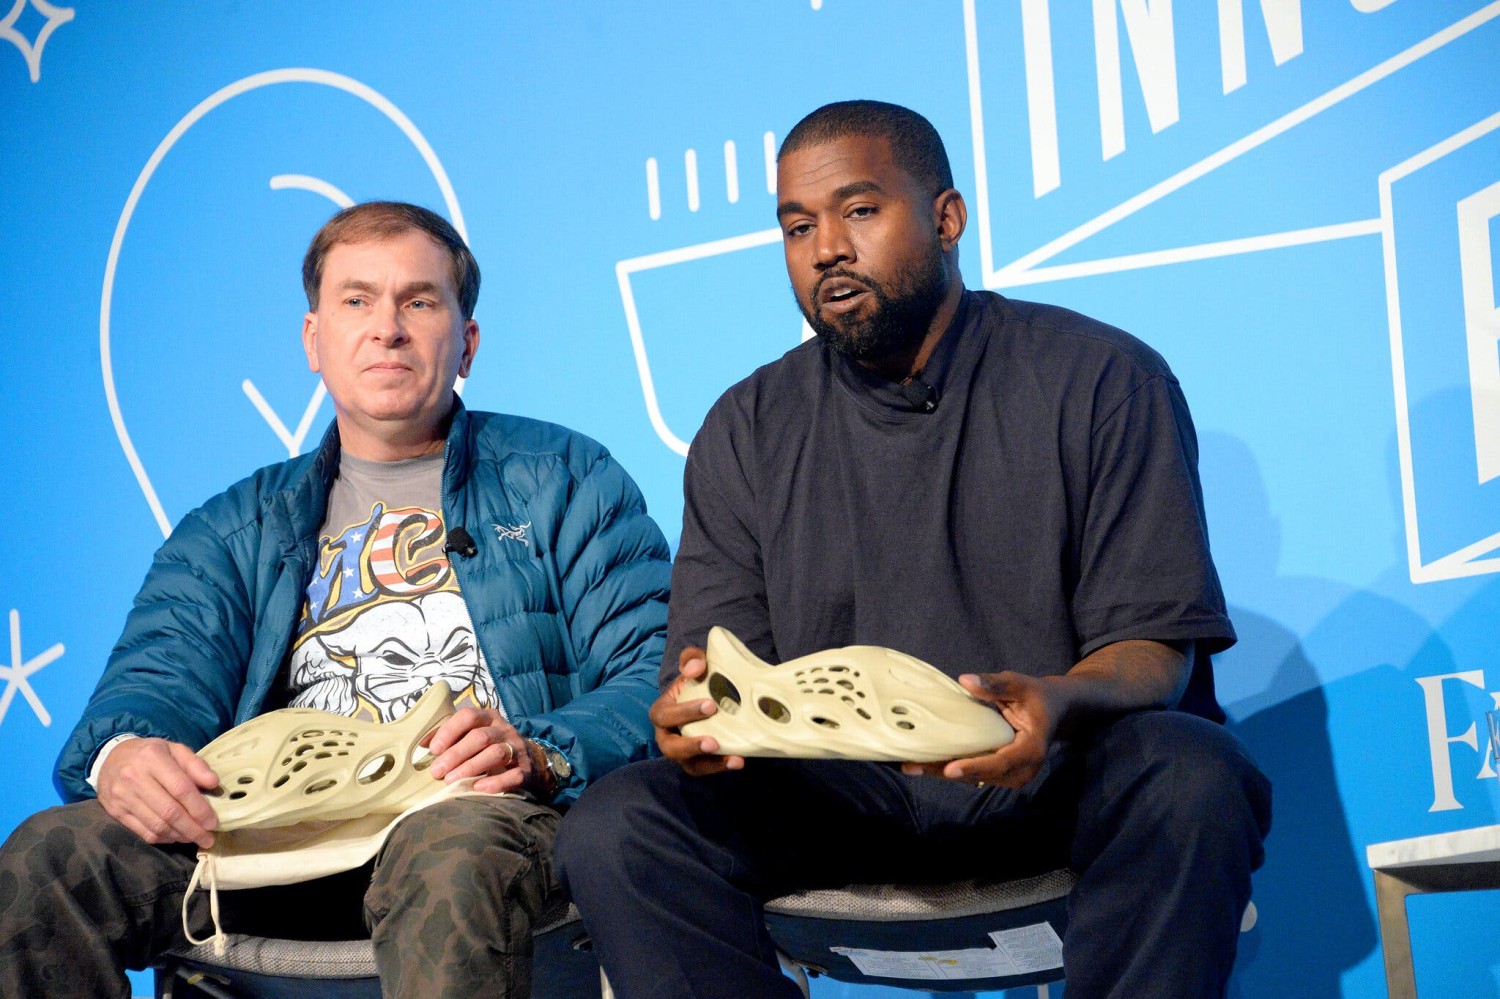 Steven Smith, a shoe designer who has worked on Yeezys for years, in 2019 with Mr. West and the distinctive Foam Runner style.Credit...Brad Barket/Getty Images for Fast Company